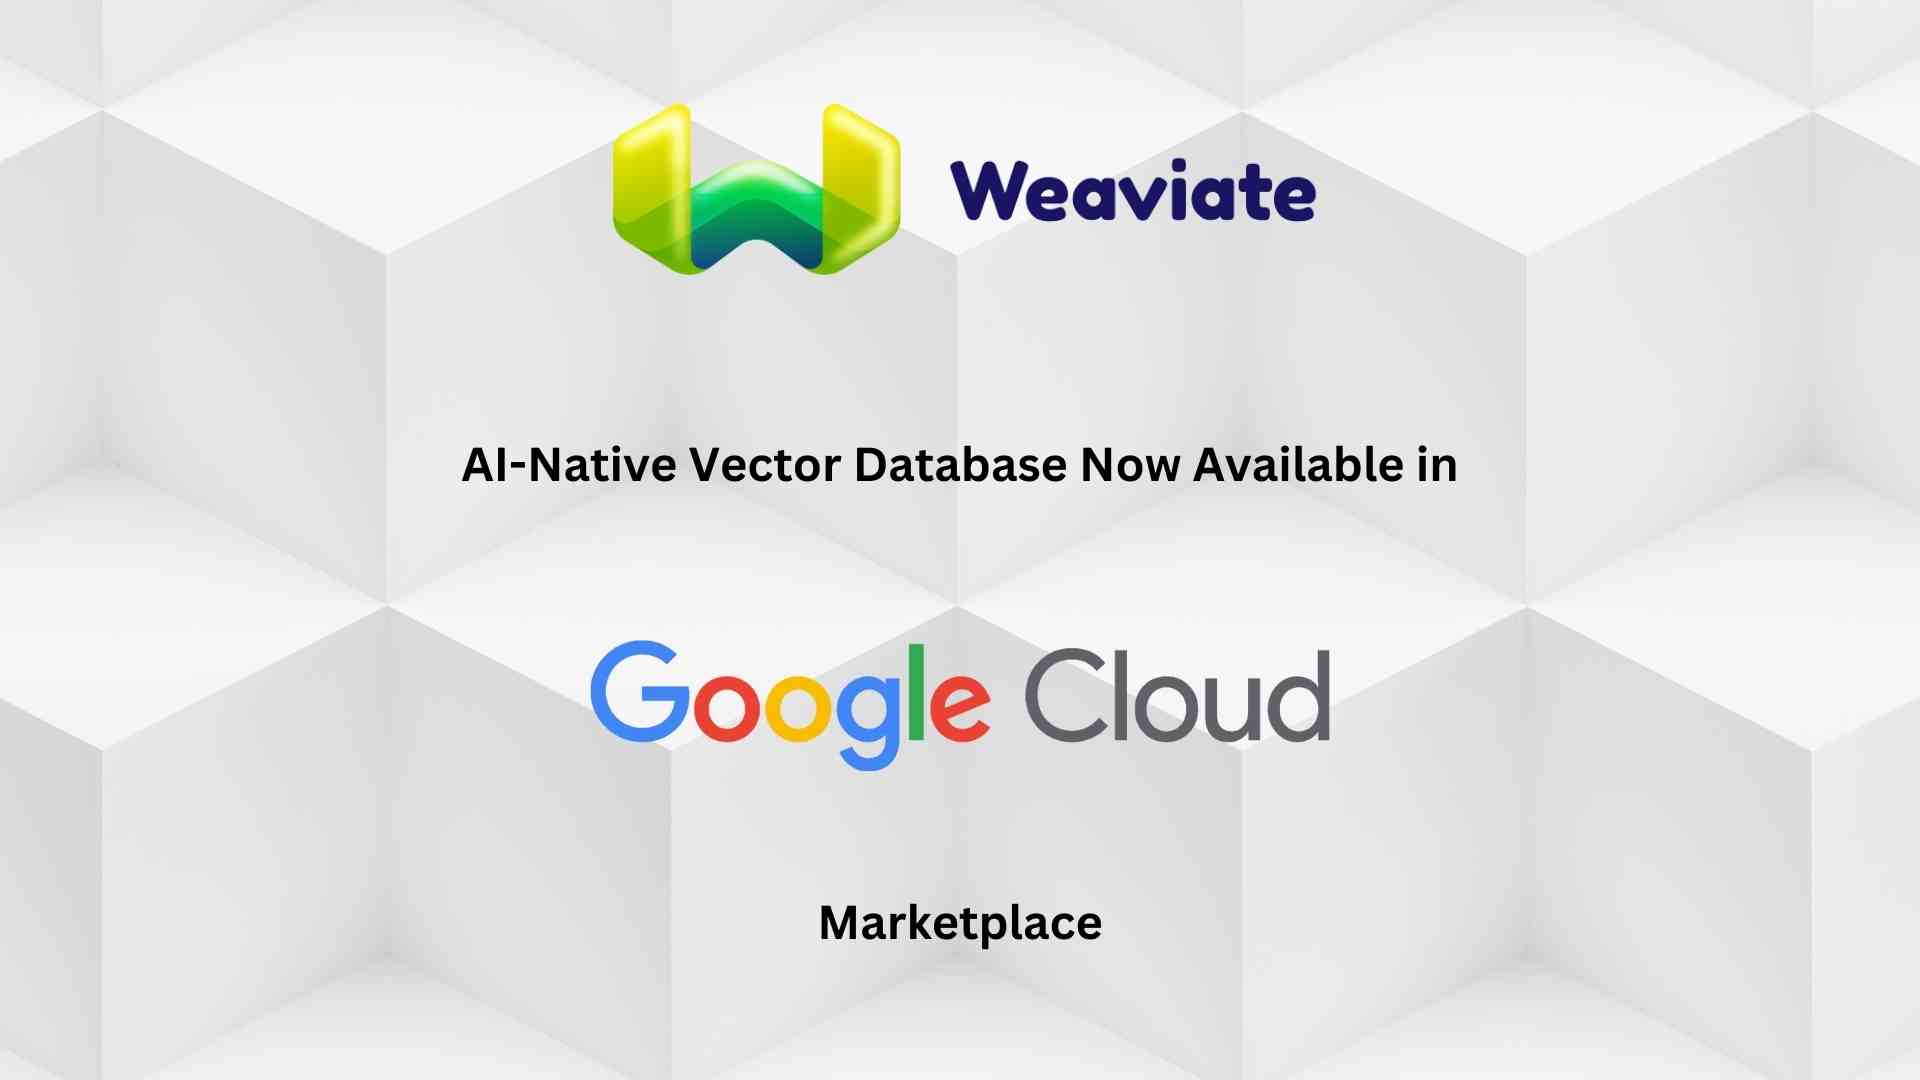 Weaviate AI-Native Vector Database Now Available in Google Cloud Marketplace